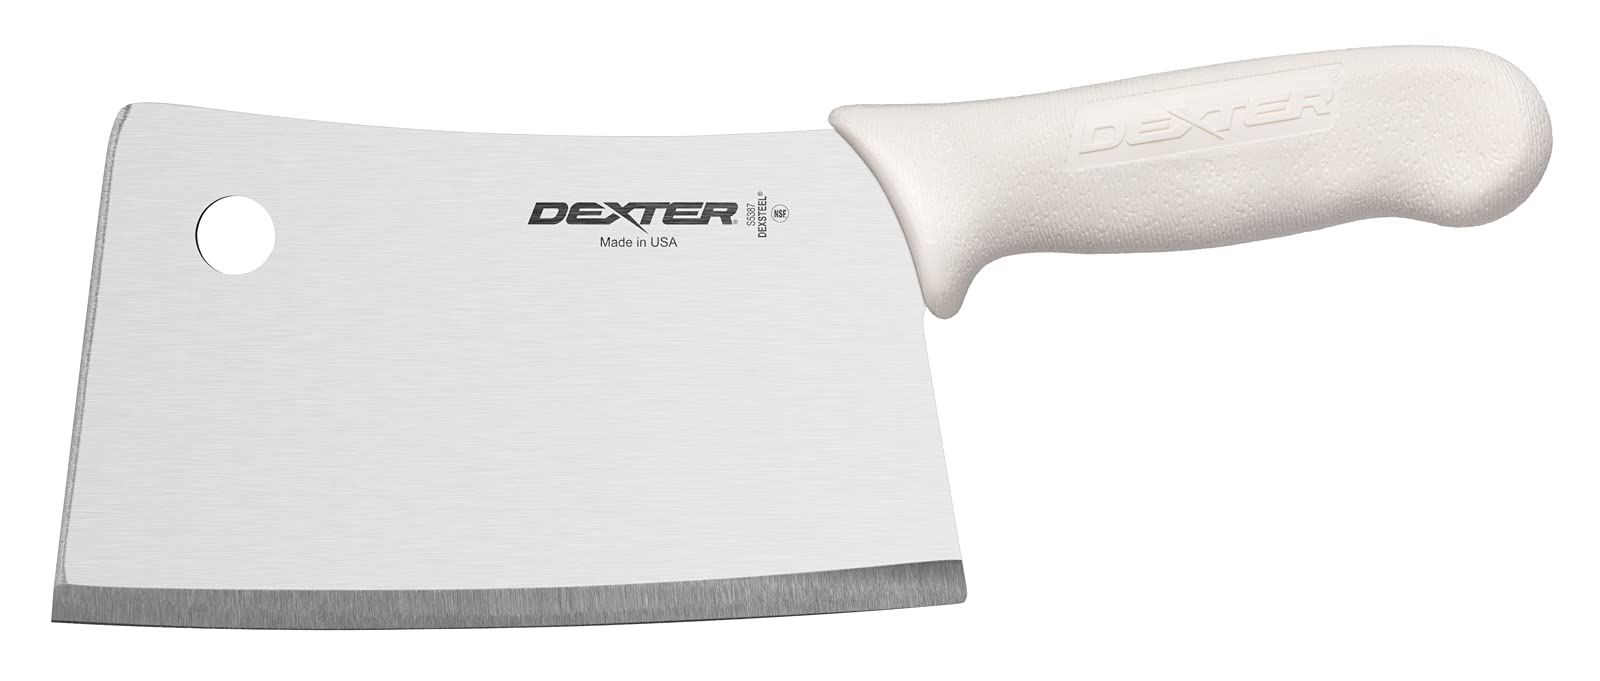 Dexter-Russell 7" Stainless Cleaver, S5387Pcp, Sani-Safe Series, White